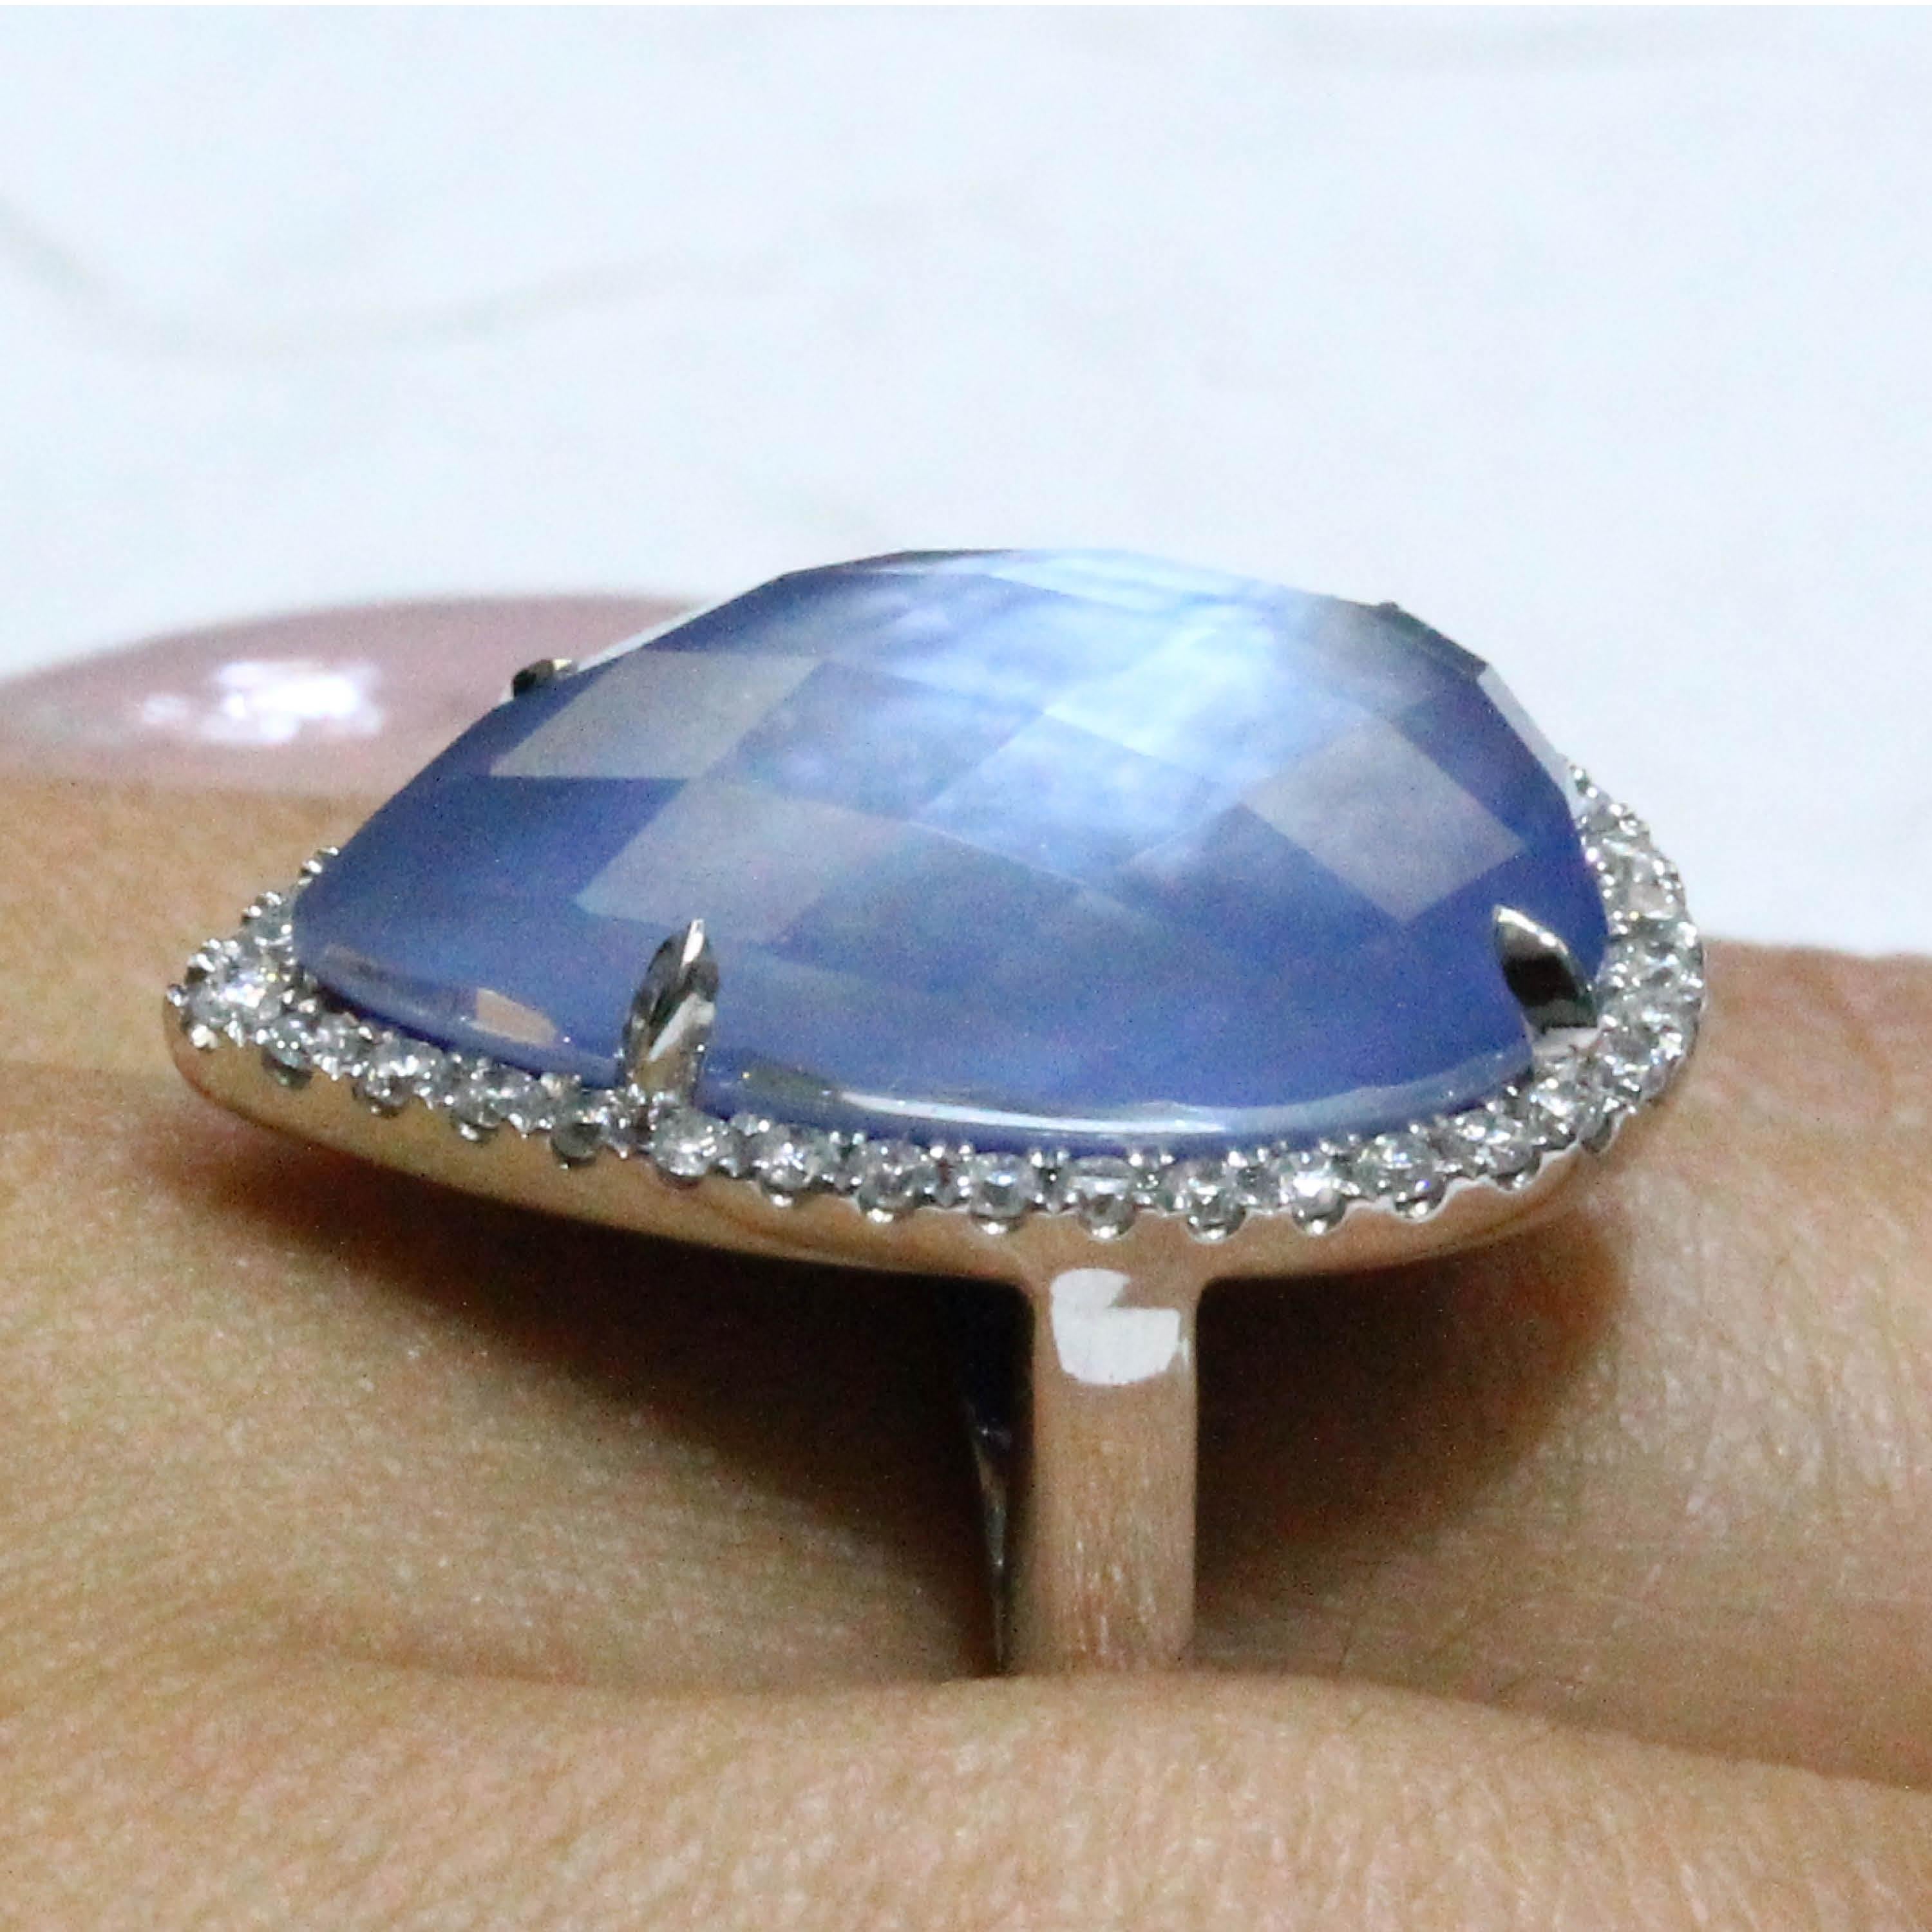 18K Gold Pear Shape Cocktail Ring with Lapis Lazuli, White Topaz and Diamonds In New Condition For Sale In Great Neck, NY